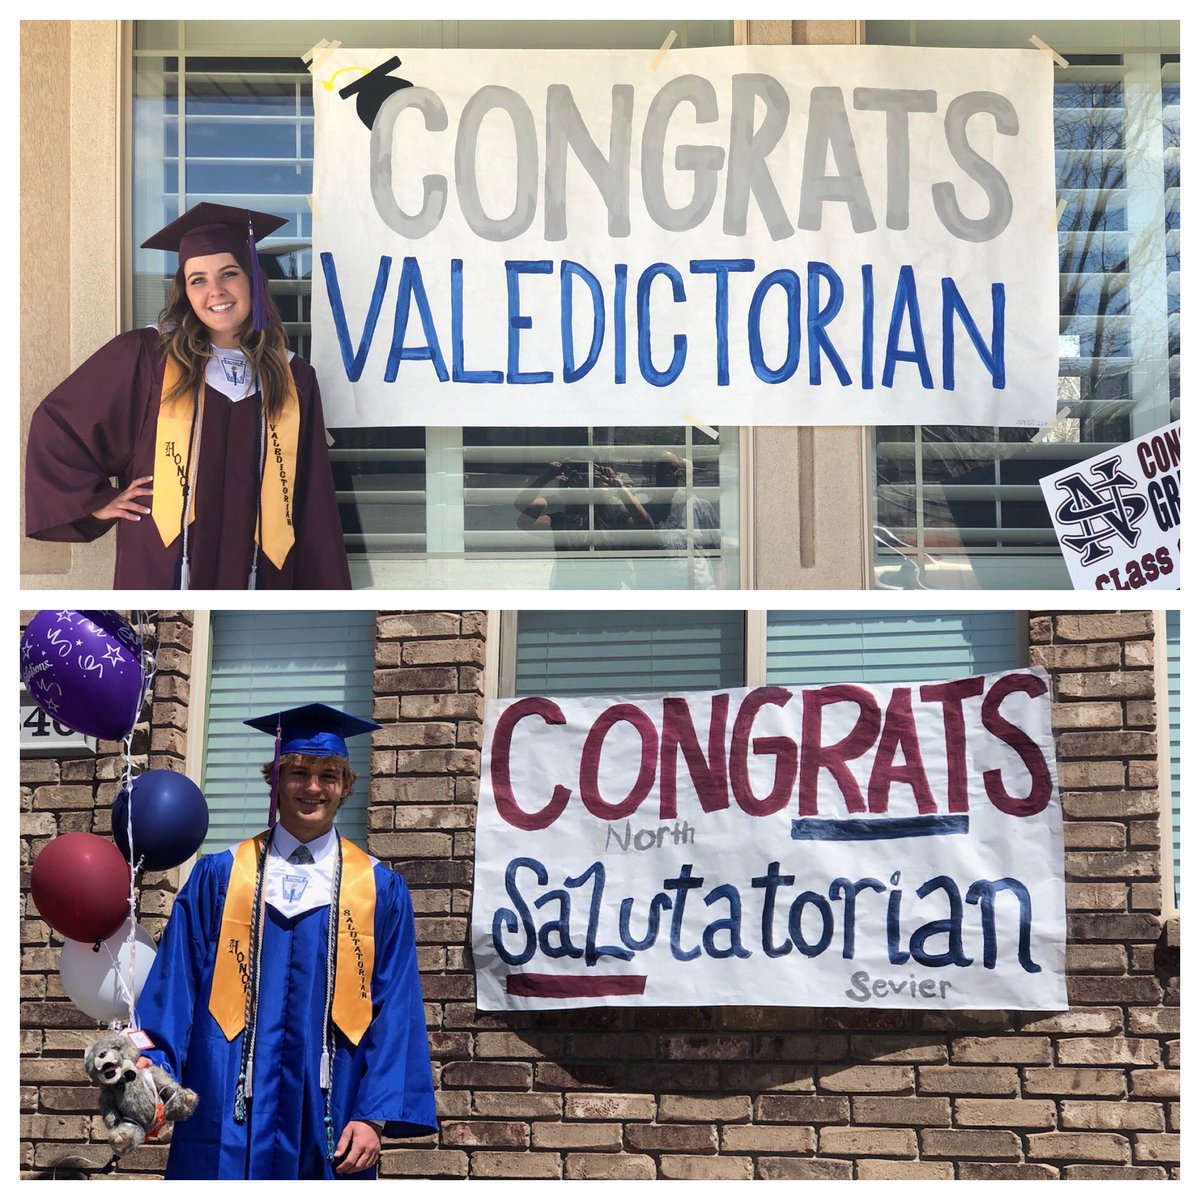 We would like to officially announce Brooke Roper as our 2020 Valedictorian and Kyler Johnson as our 2020 Salutatorian!! Congratulations!! #Classof2020 #seviersdstrong